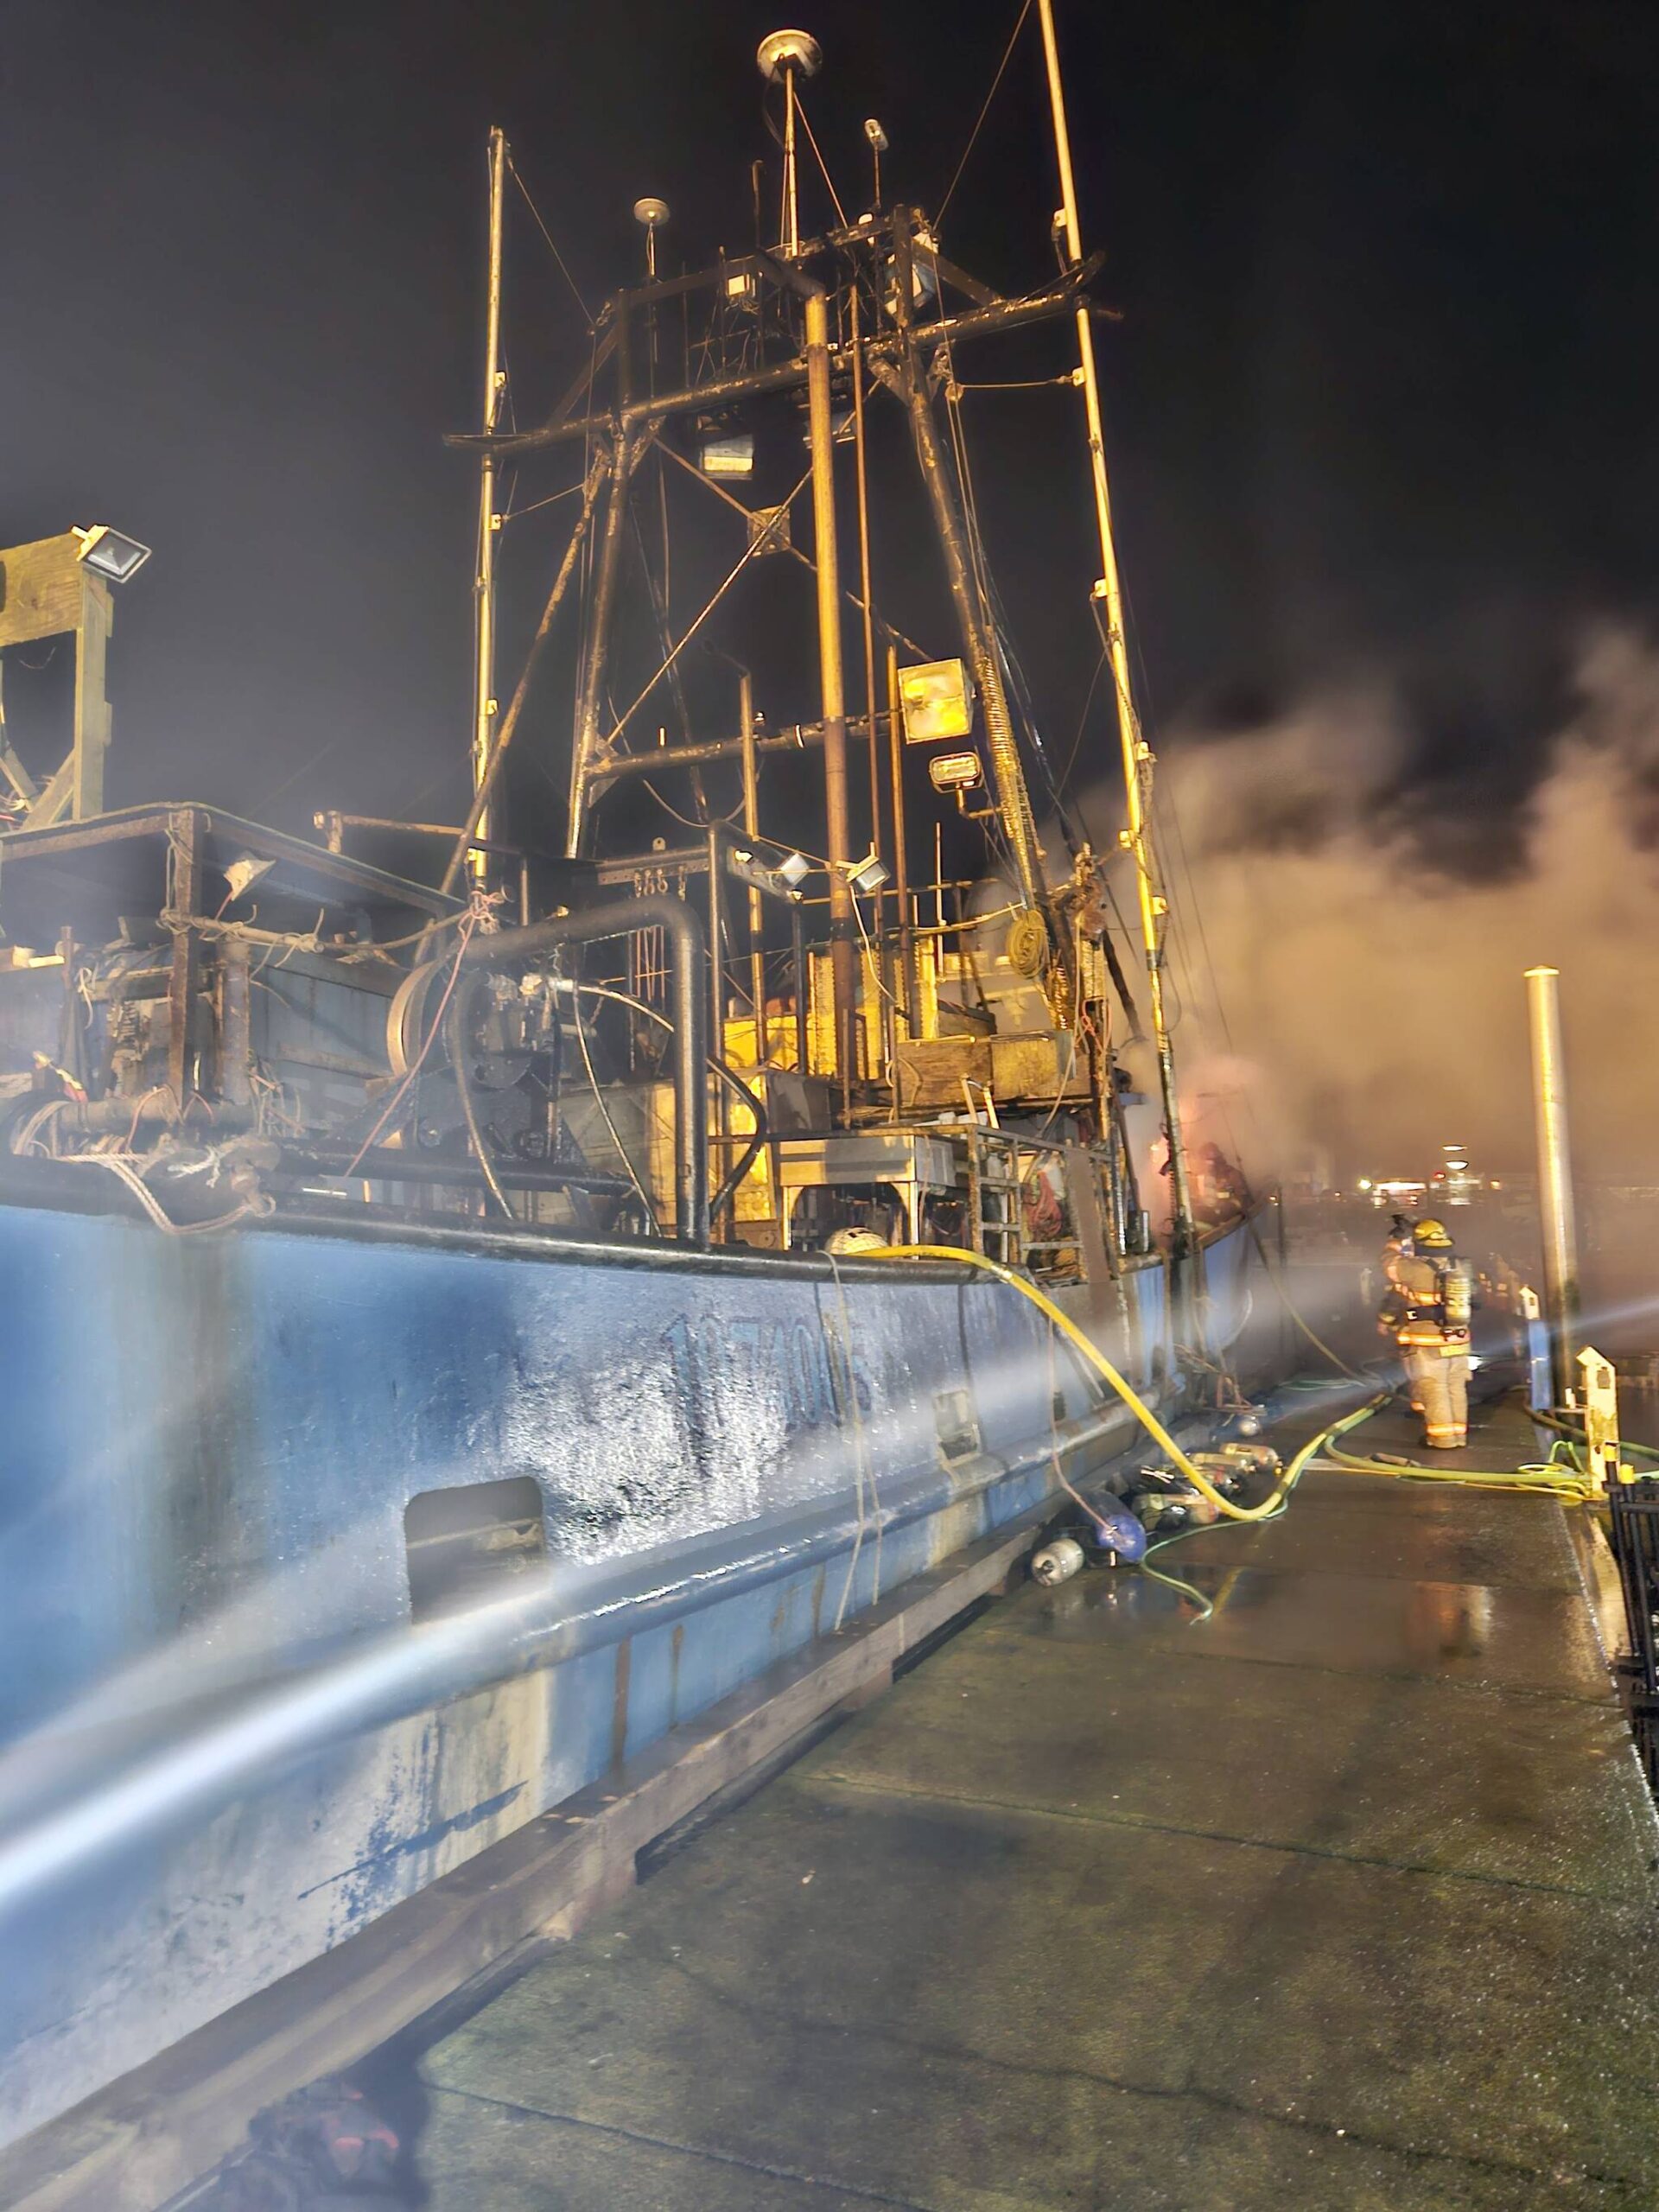 Firefighters from the South Beach Regional Fire Authority combat a blaze aboard a fishing vessel in the Westport Marina on March 9. (Courtesy photo / SBRFA)